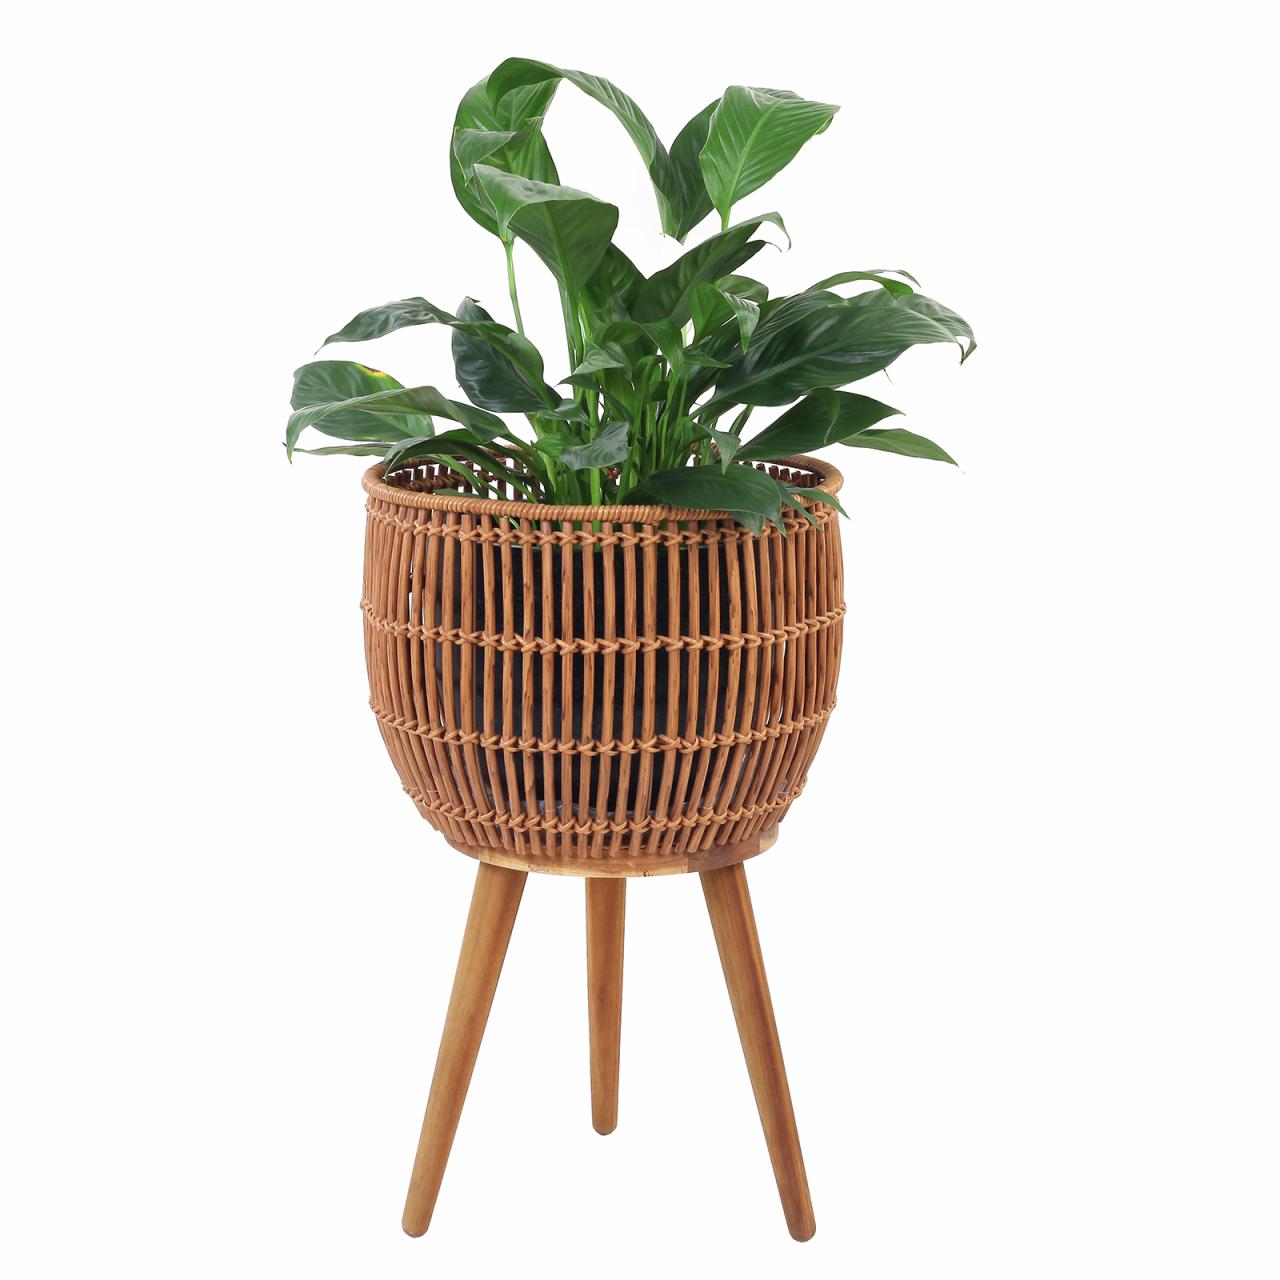 Hanging Plants Indoor | Basket Planter Bunnings: A Guide to Design, Selection, Care, and Display